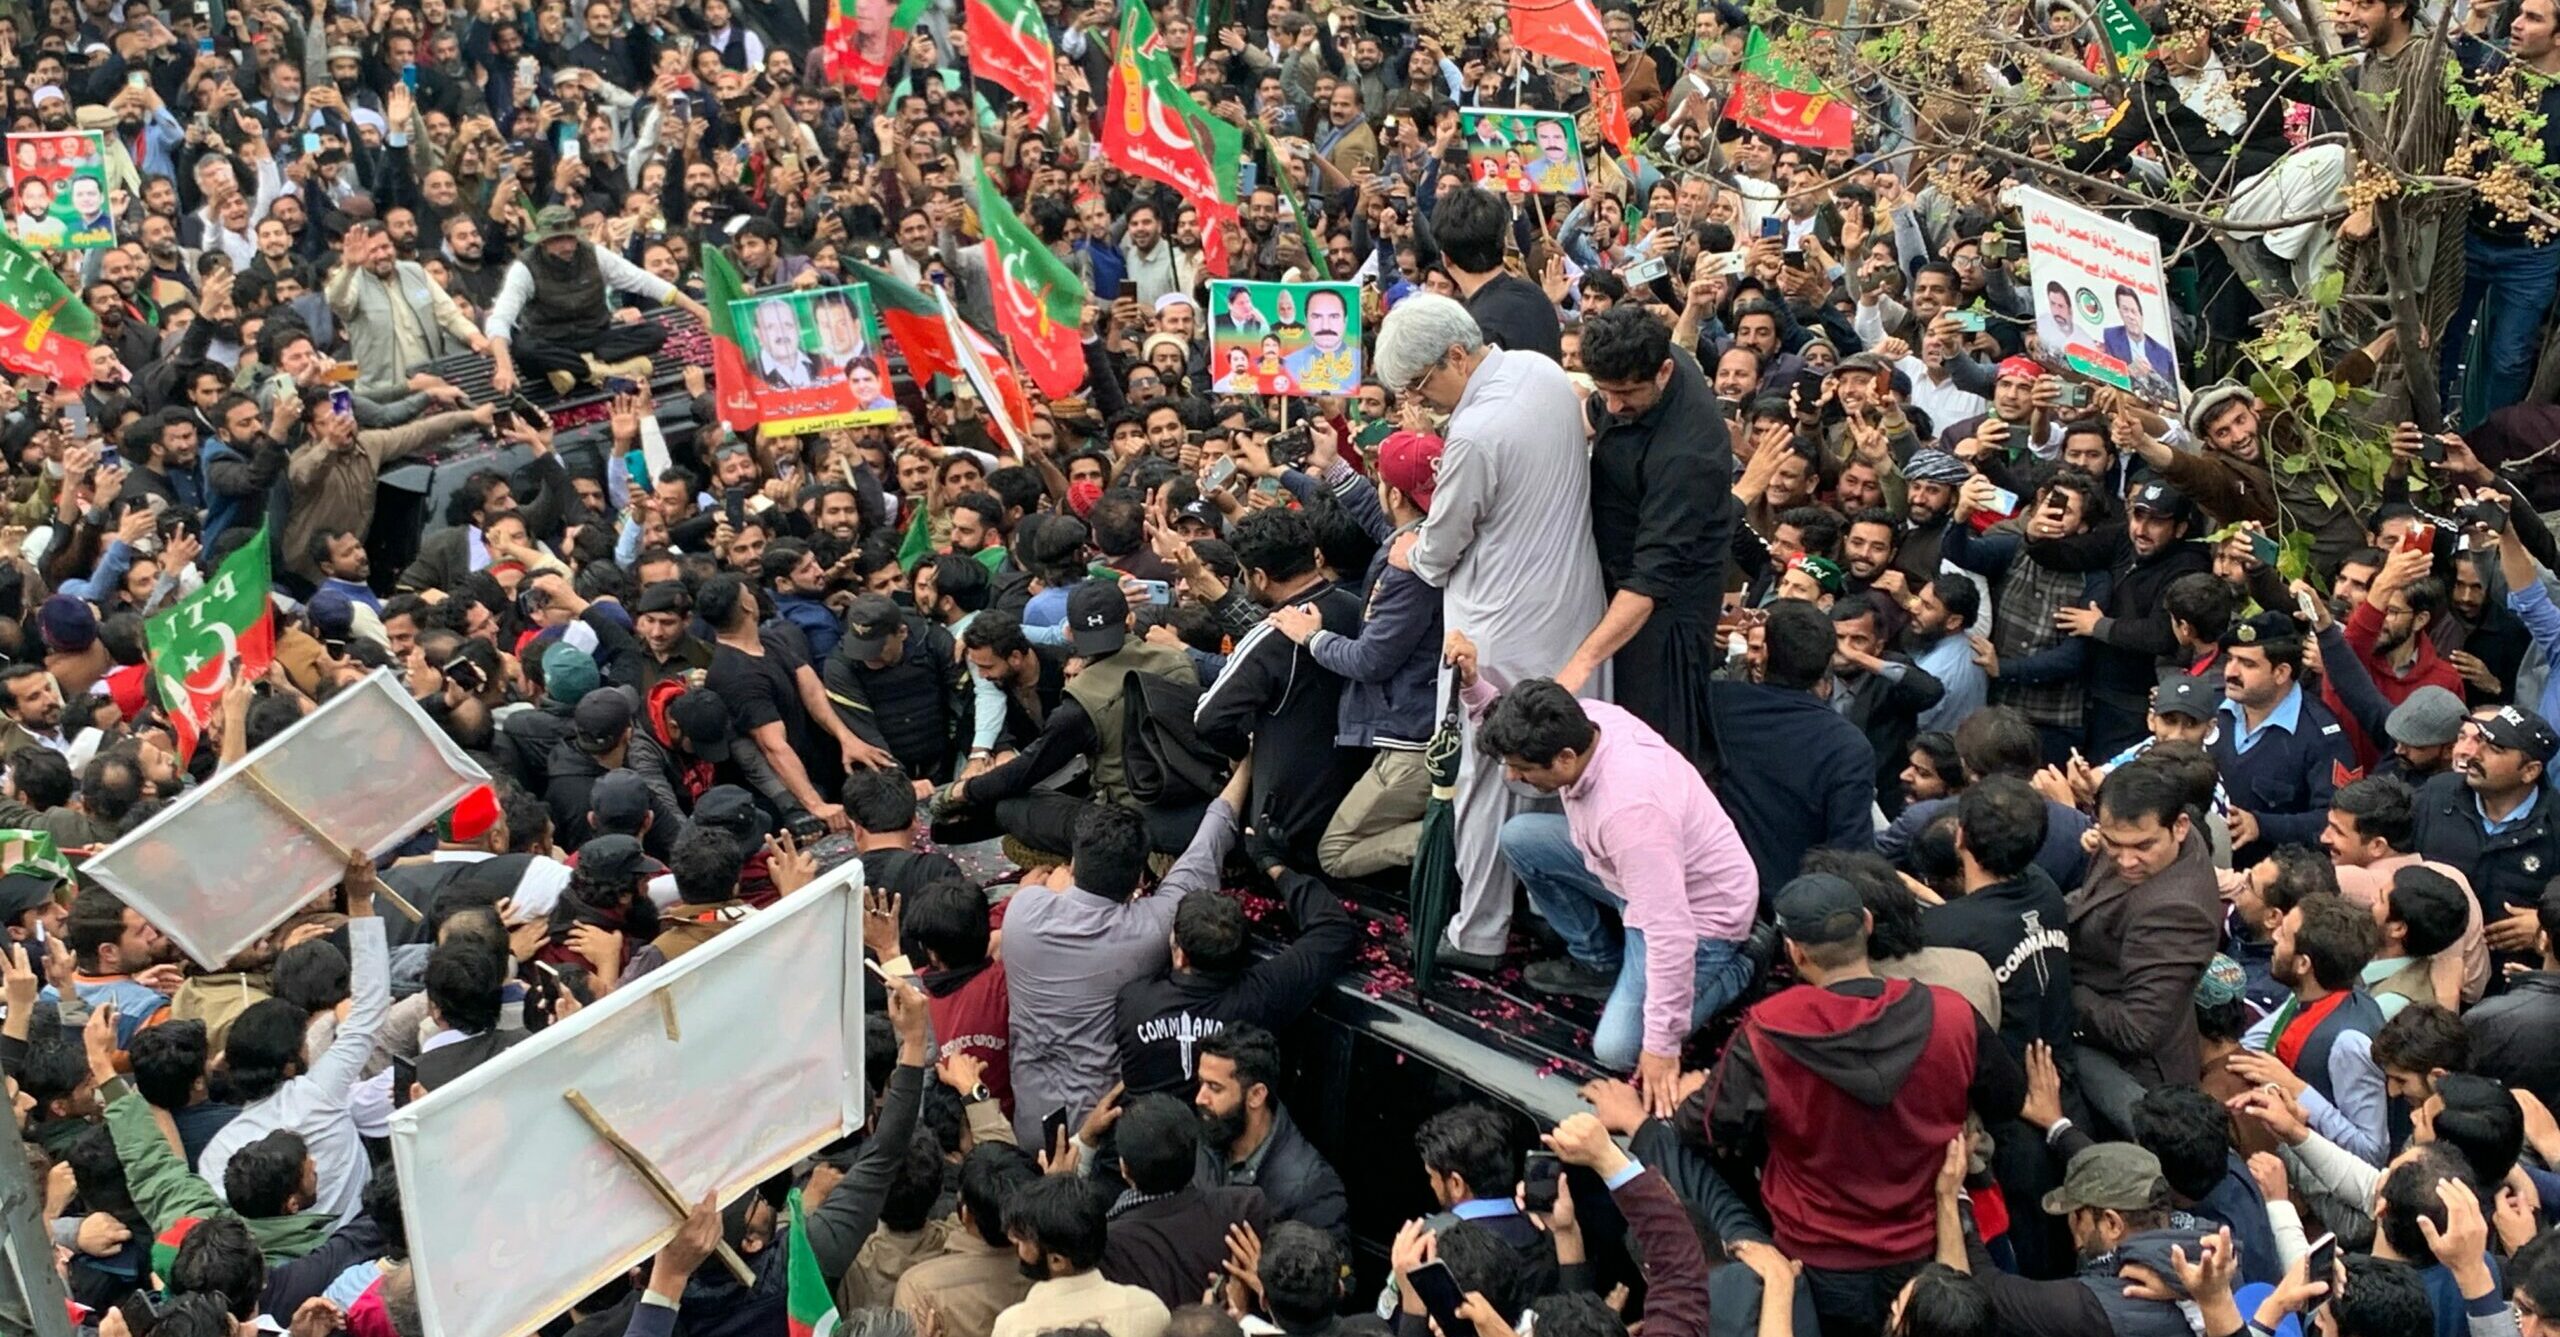 Image: Supporters gather around a car carrying Pakistan's former Prime Minister Imran Khan (not pictured) after he appeared at the court in Islamabad on February 28, 2023. Photo by Farooq Naeem/AFP via Getty Images.